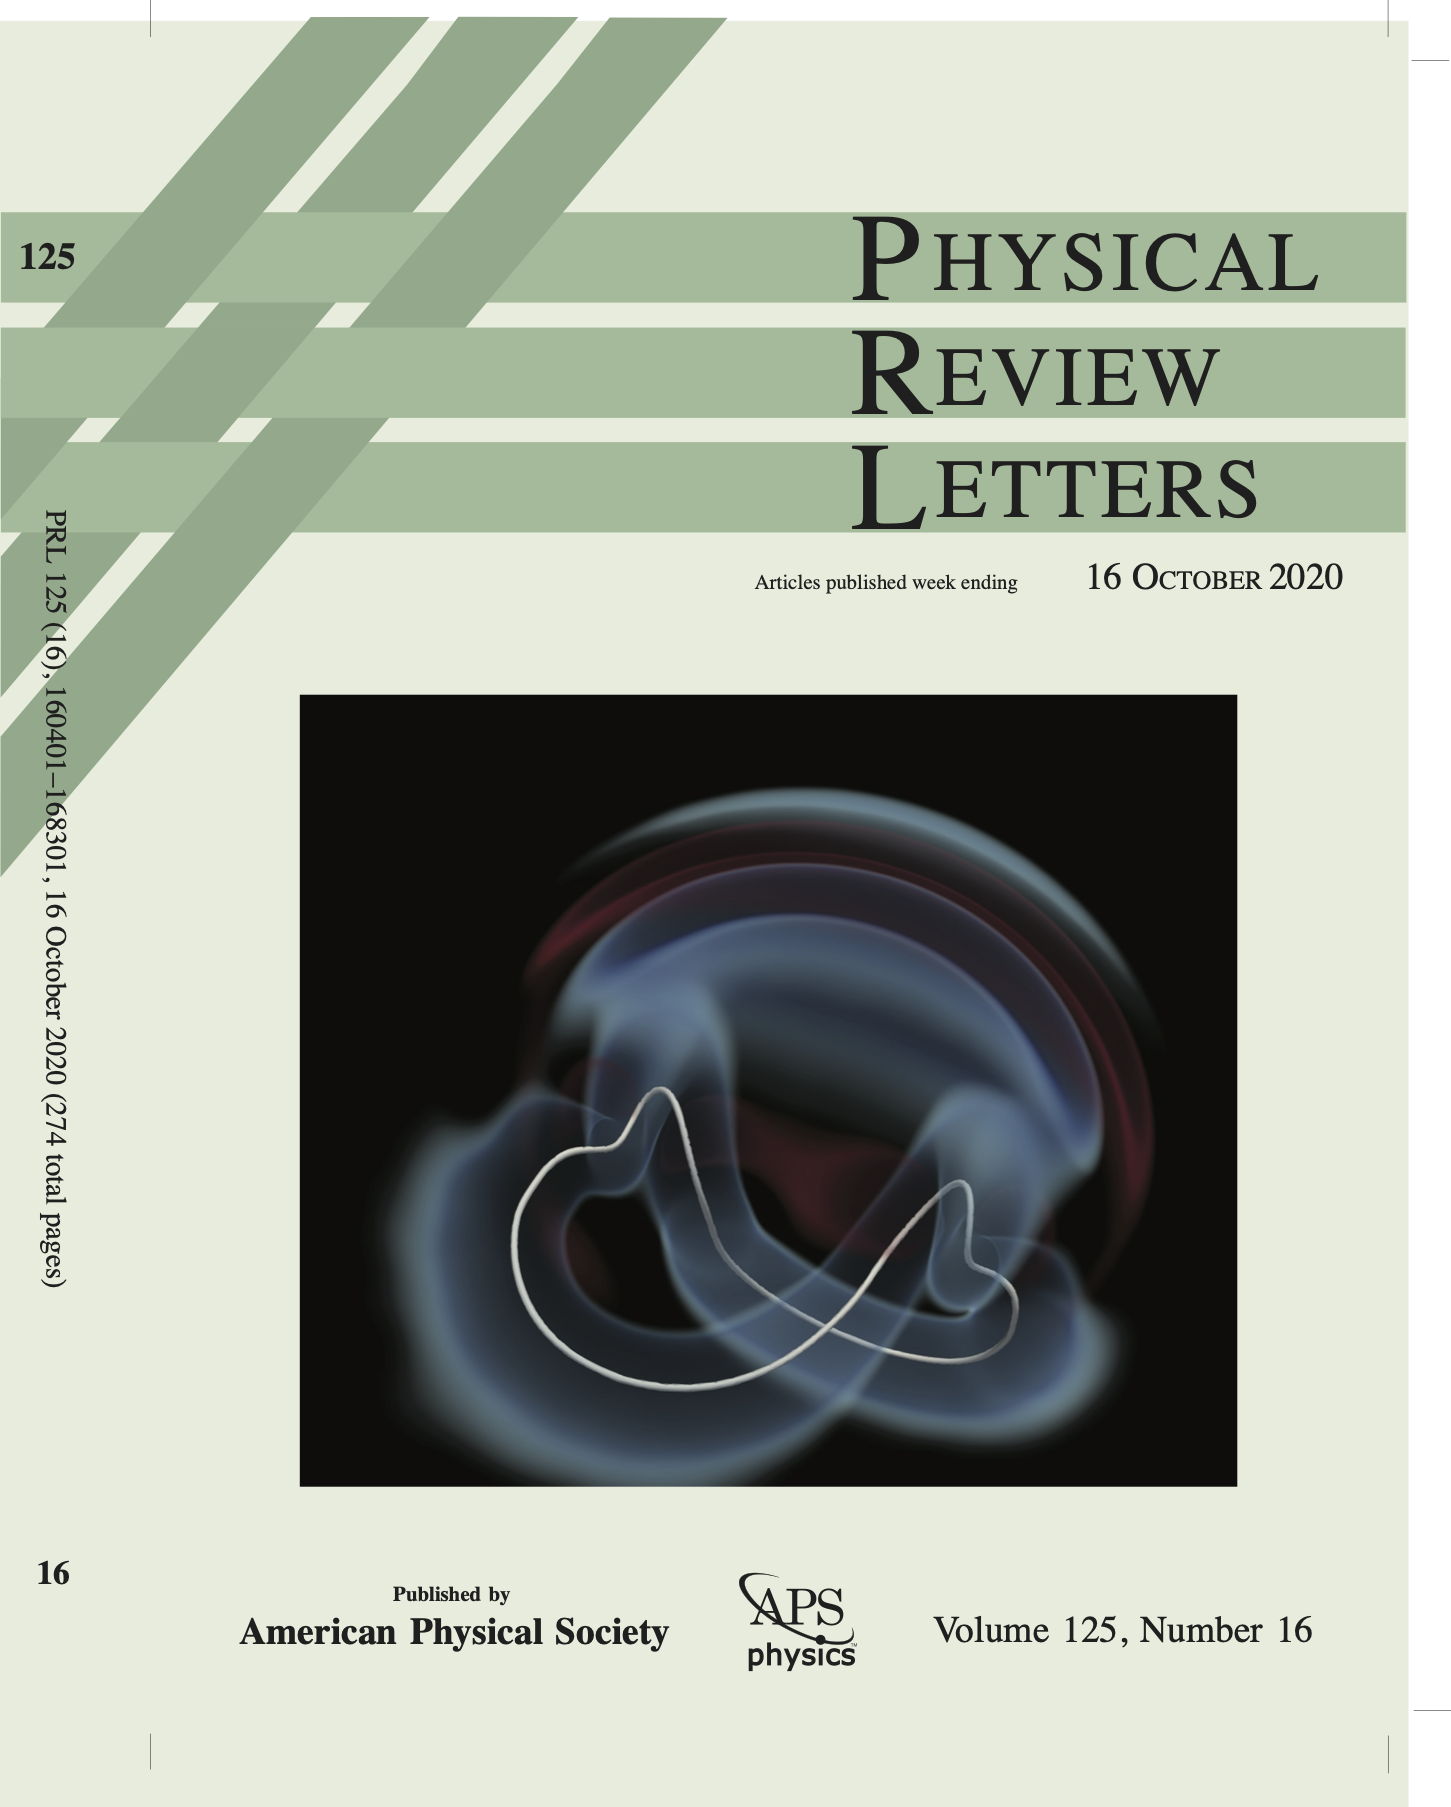 Physical Review Letters cover, Volume 125, Issue 16